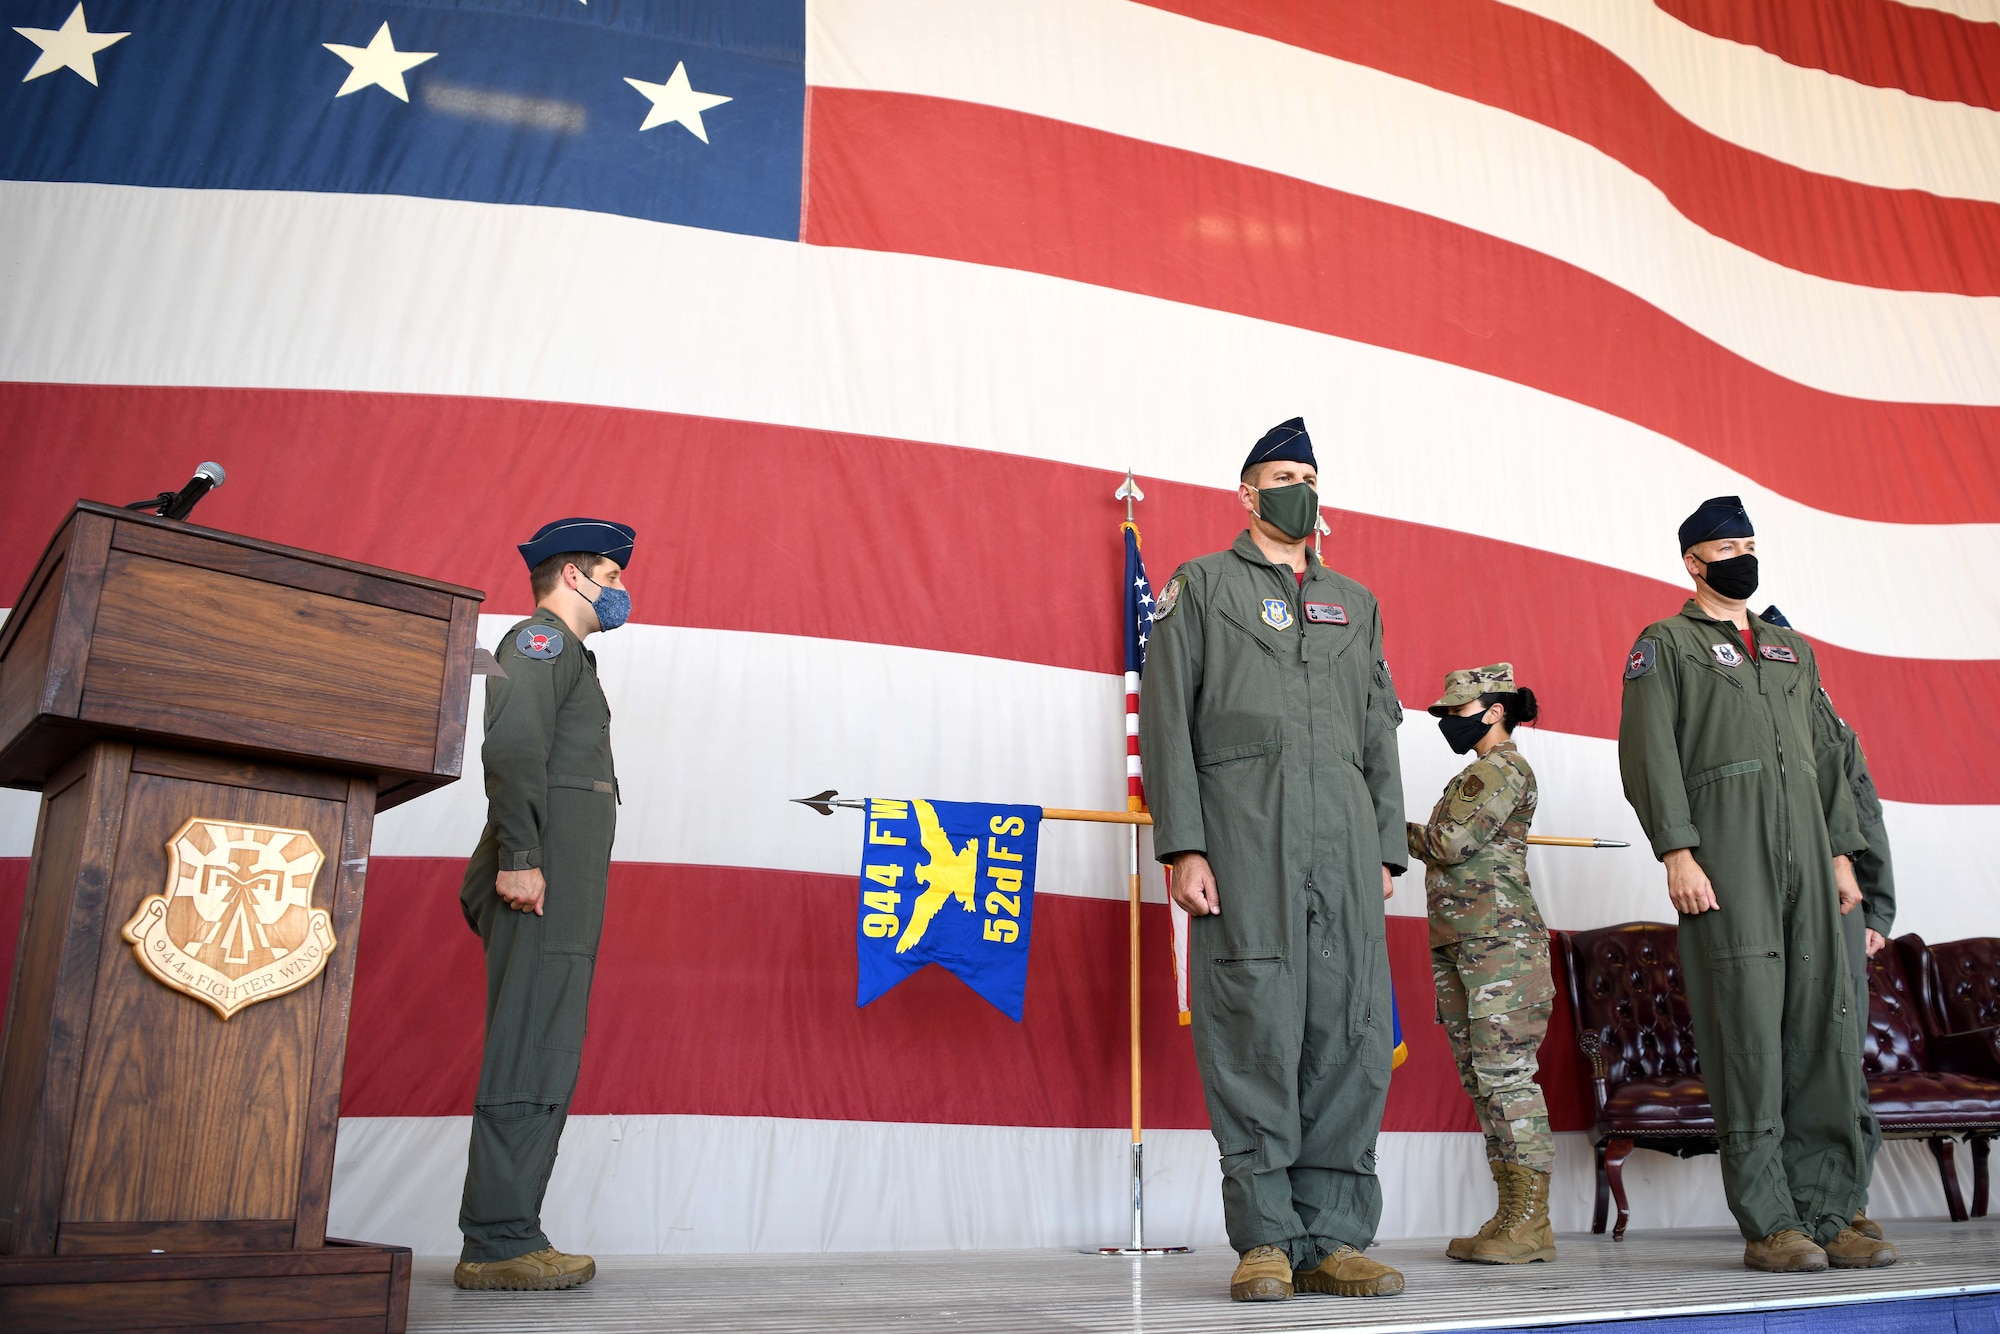 LUKE AIR FORCE BASE, ARIZ. – Reserve Citizen Airman Senior Master Sgt. Jacqueline Flores, 944th Operations Group Superintendent, unveils the new flag for the 52nd Fighter Squadron at the reactivation ceremony at Luke Air Force Base, Arizona, August 6, 2021. Detachment 2 grew in personnel changing their designation to a fighter squadron. They are still recognized as the Ninjas. (U.S. Air Force Photo/Tech. Sgt. Courtney Richardson)